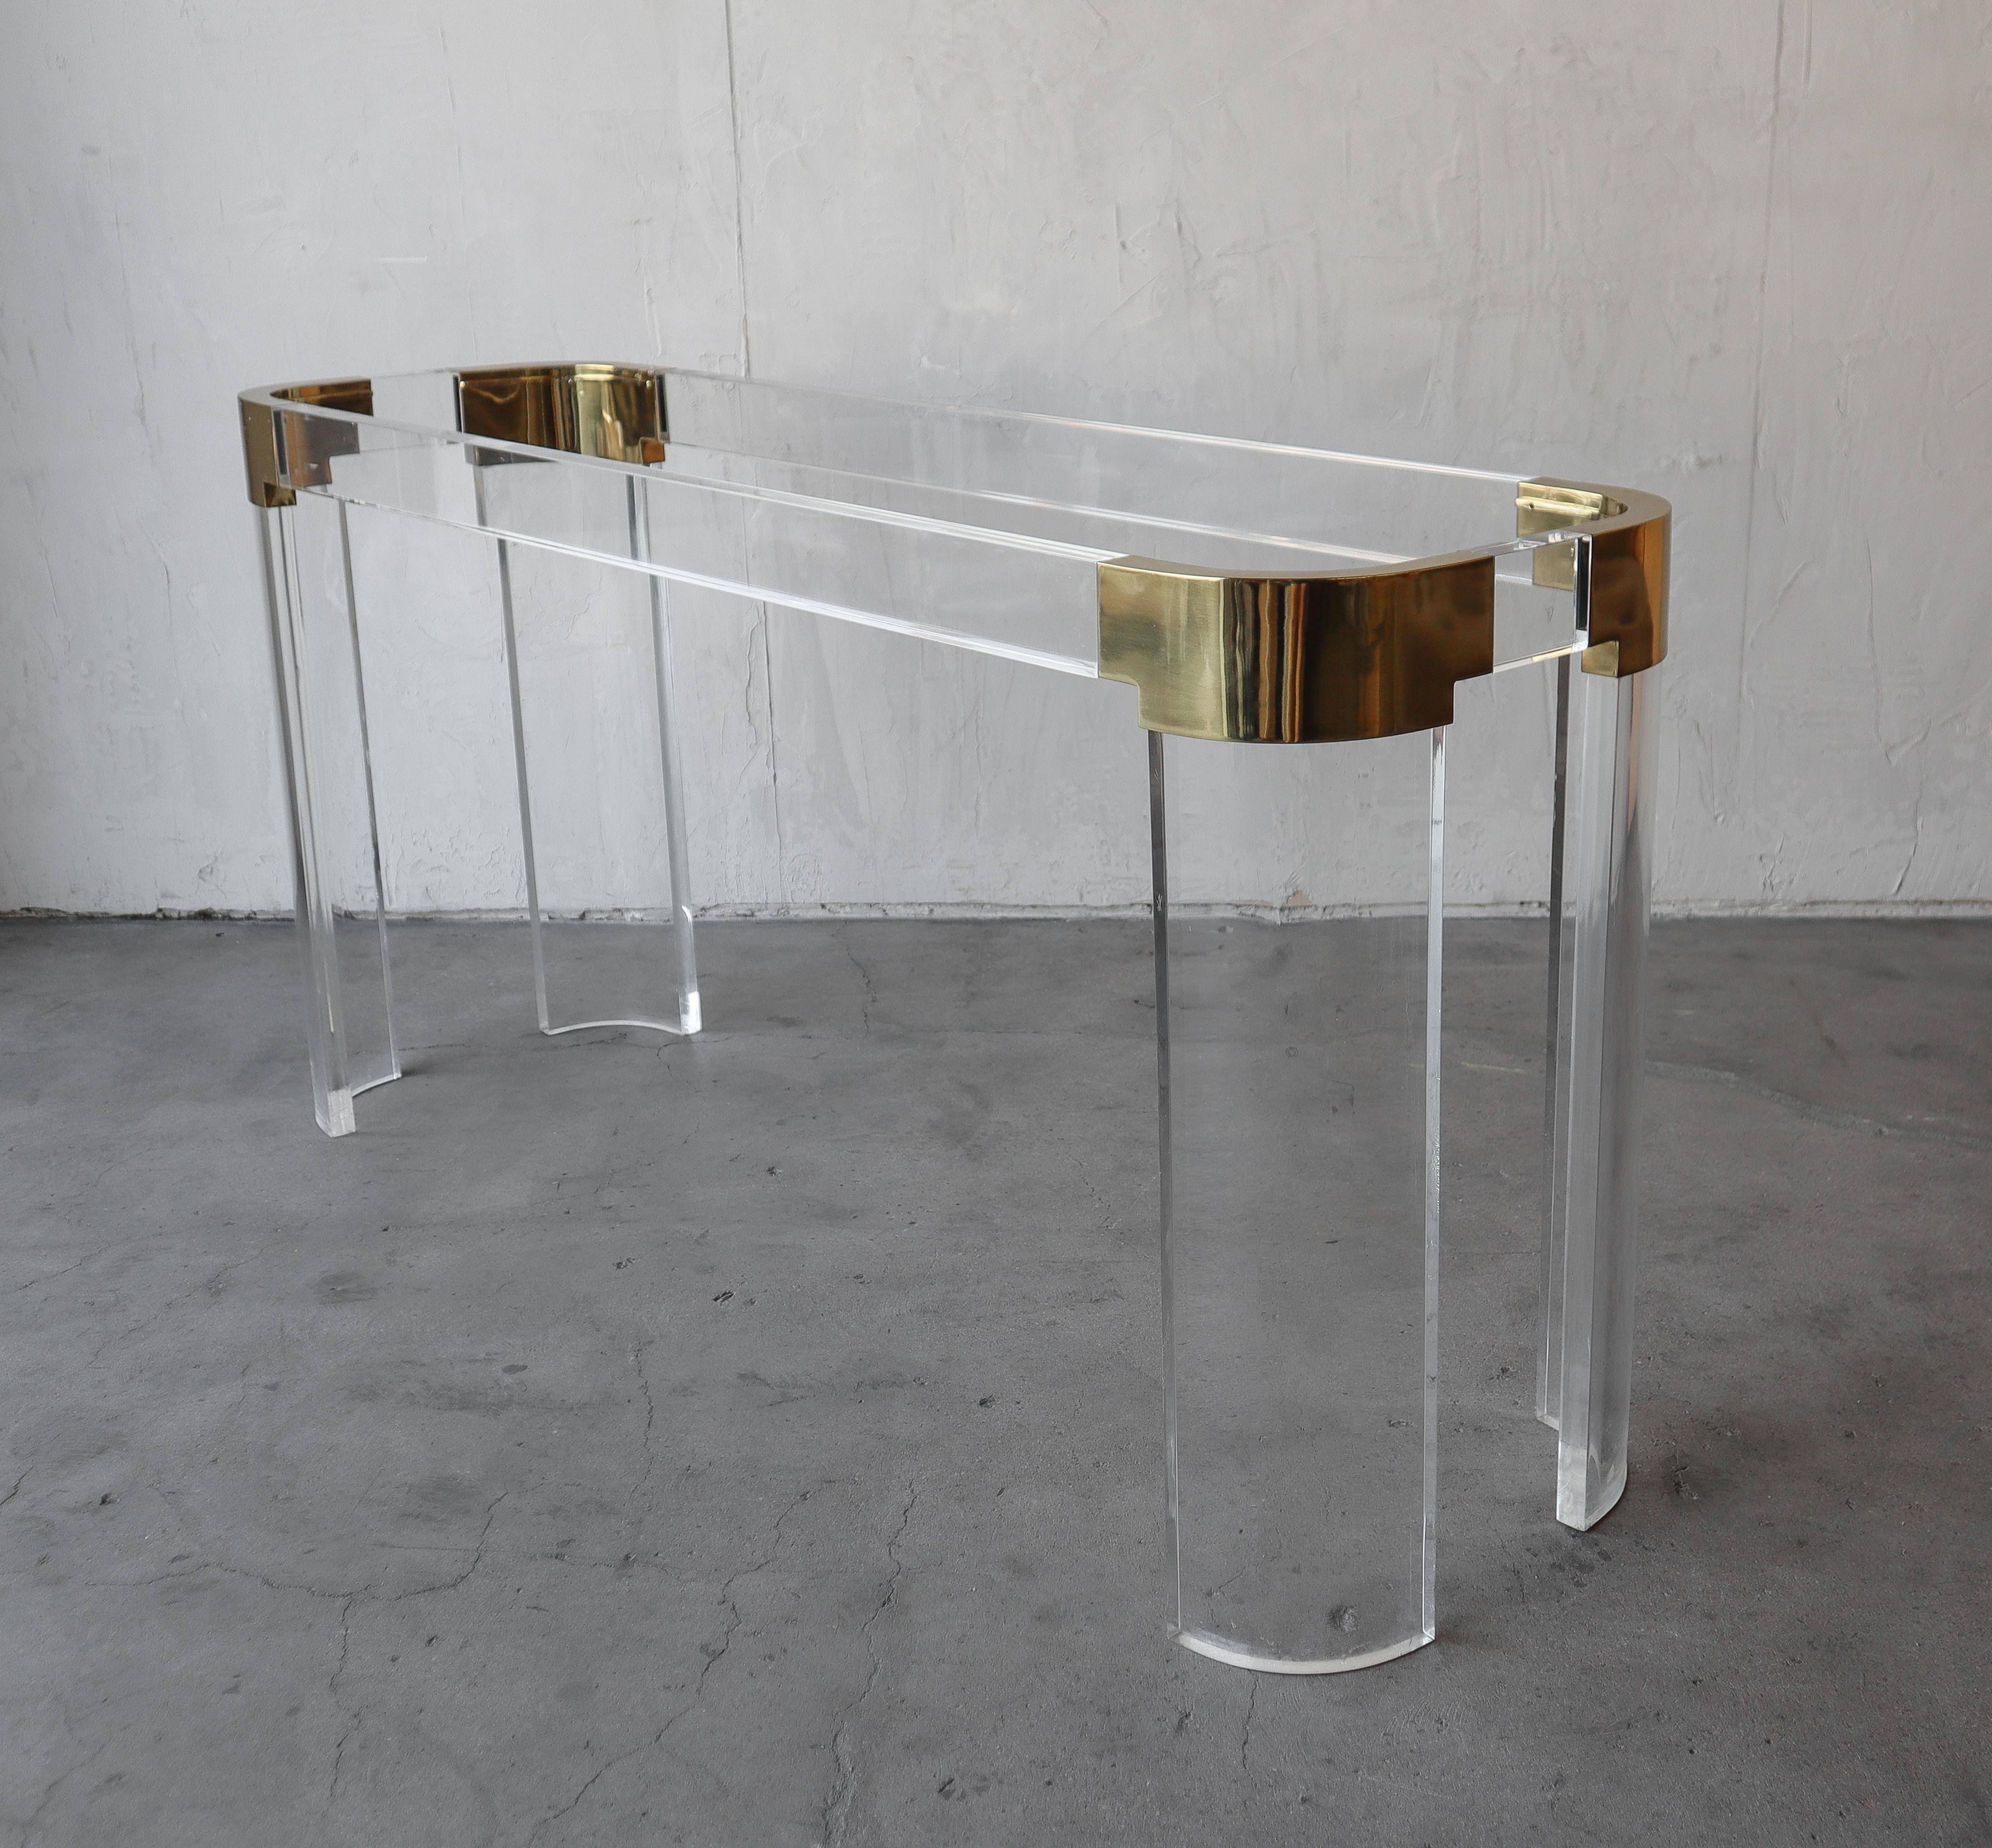 Rarely seen, Lucite and brass console table by Charles Hollis Jones, from his Waterfall collection in the 1970s.

This table is fairly substantial and in excellent condition overall.  There are a few small marks on the Lucite but nothing that